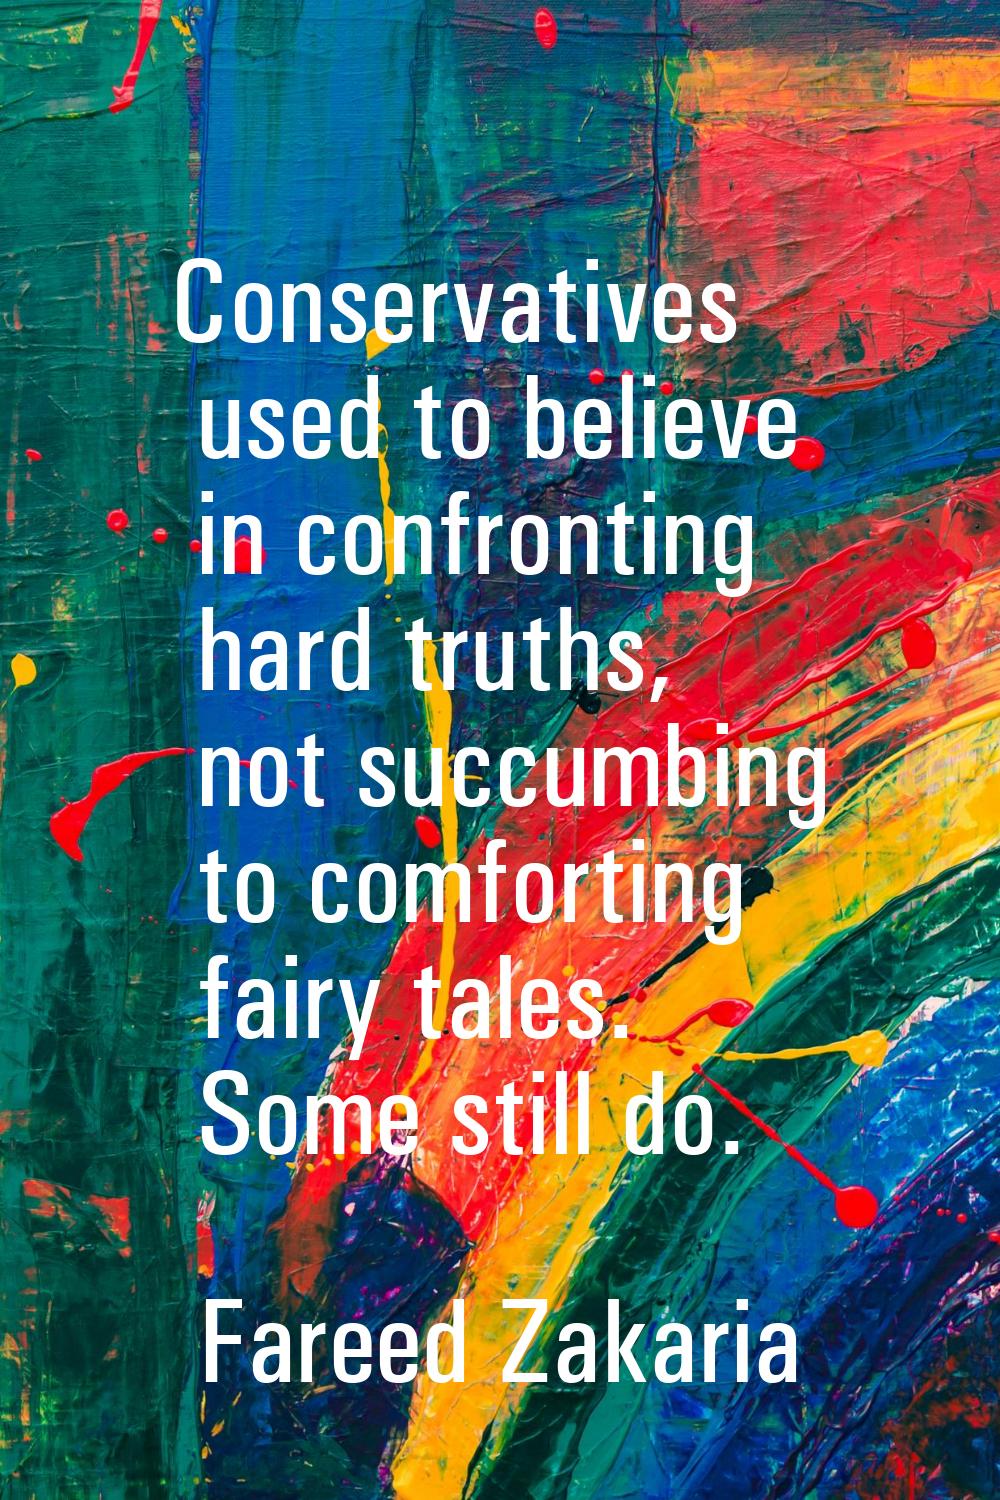 Conservatives used to believe in confronting hard truths, not succumbing to comforting fairy tales.